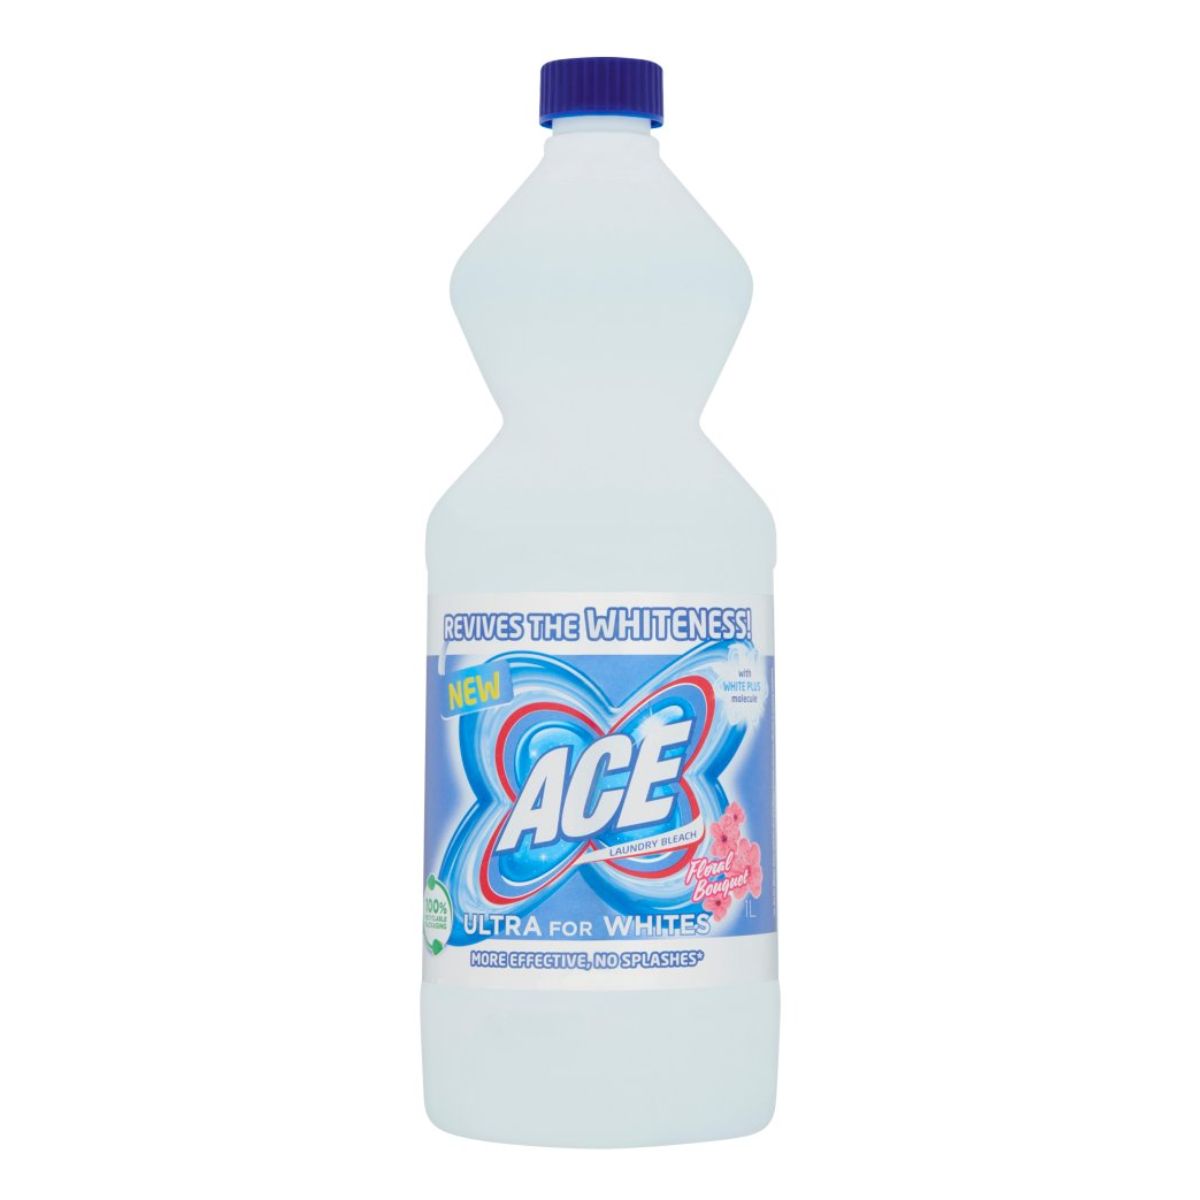 A bottle of ACE - Ultra for Whites Stain Remover - 1L on a white background.